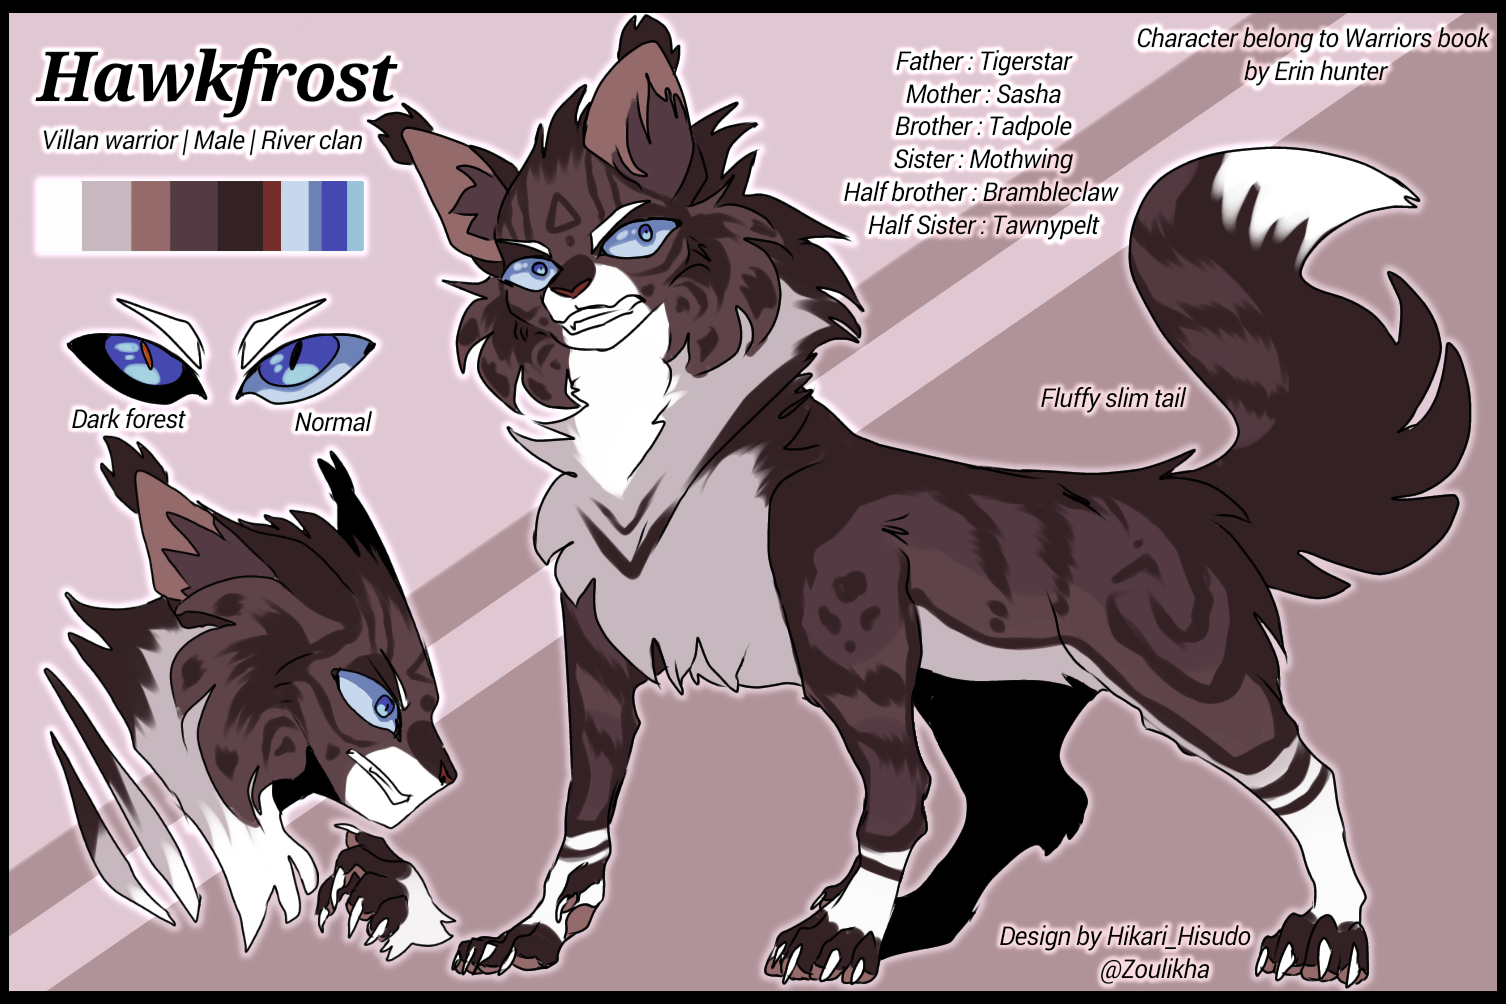 1. "Hawkfrost with Blue Hair" by Warrior Cats Wiki - wide 5